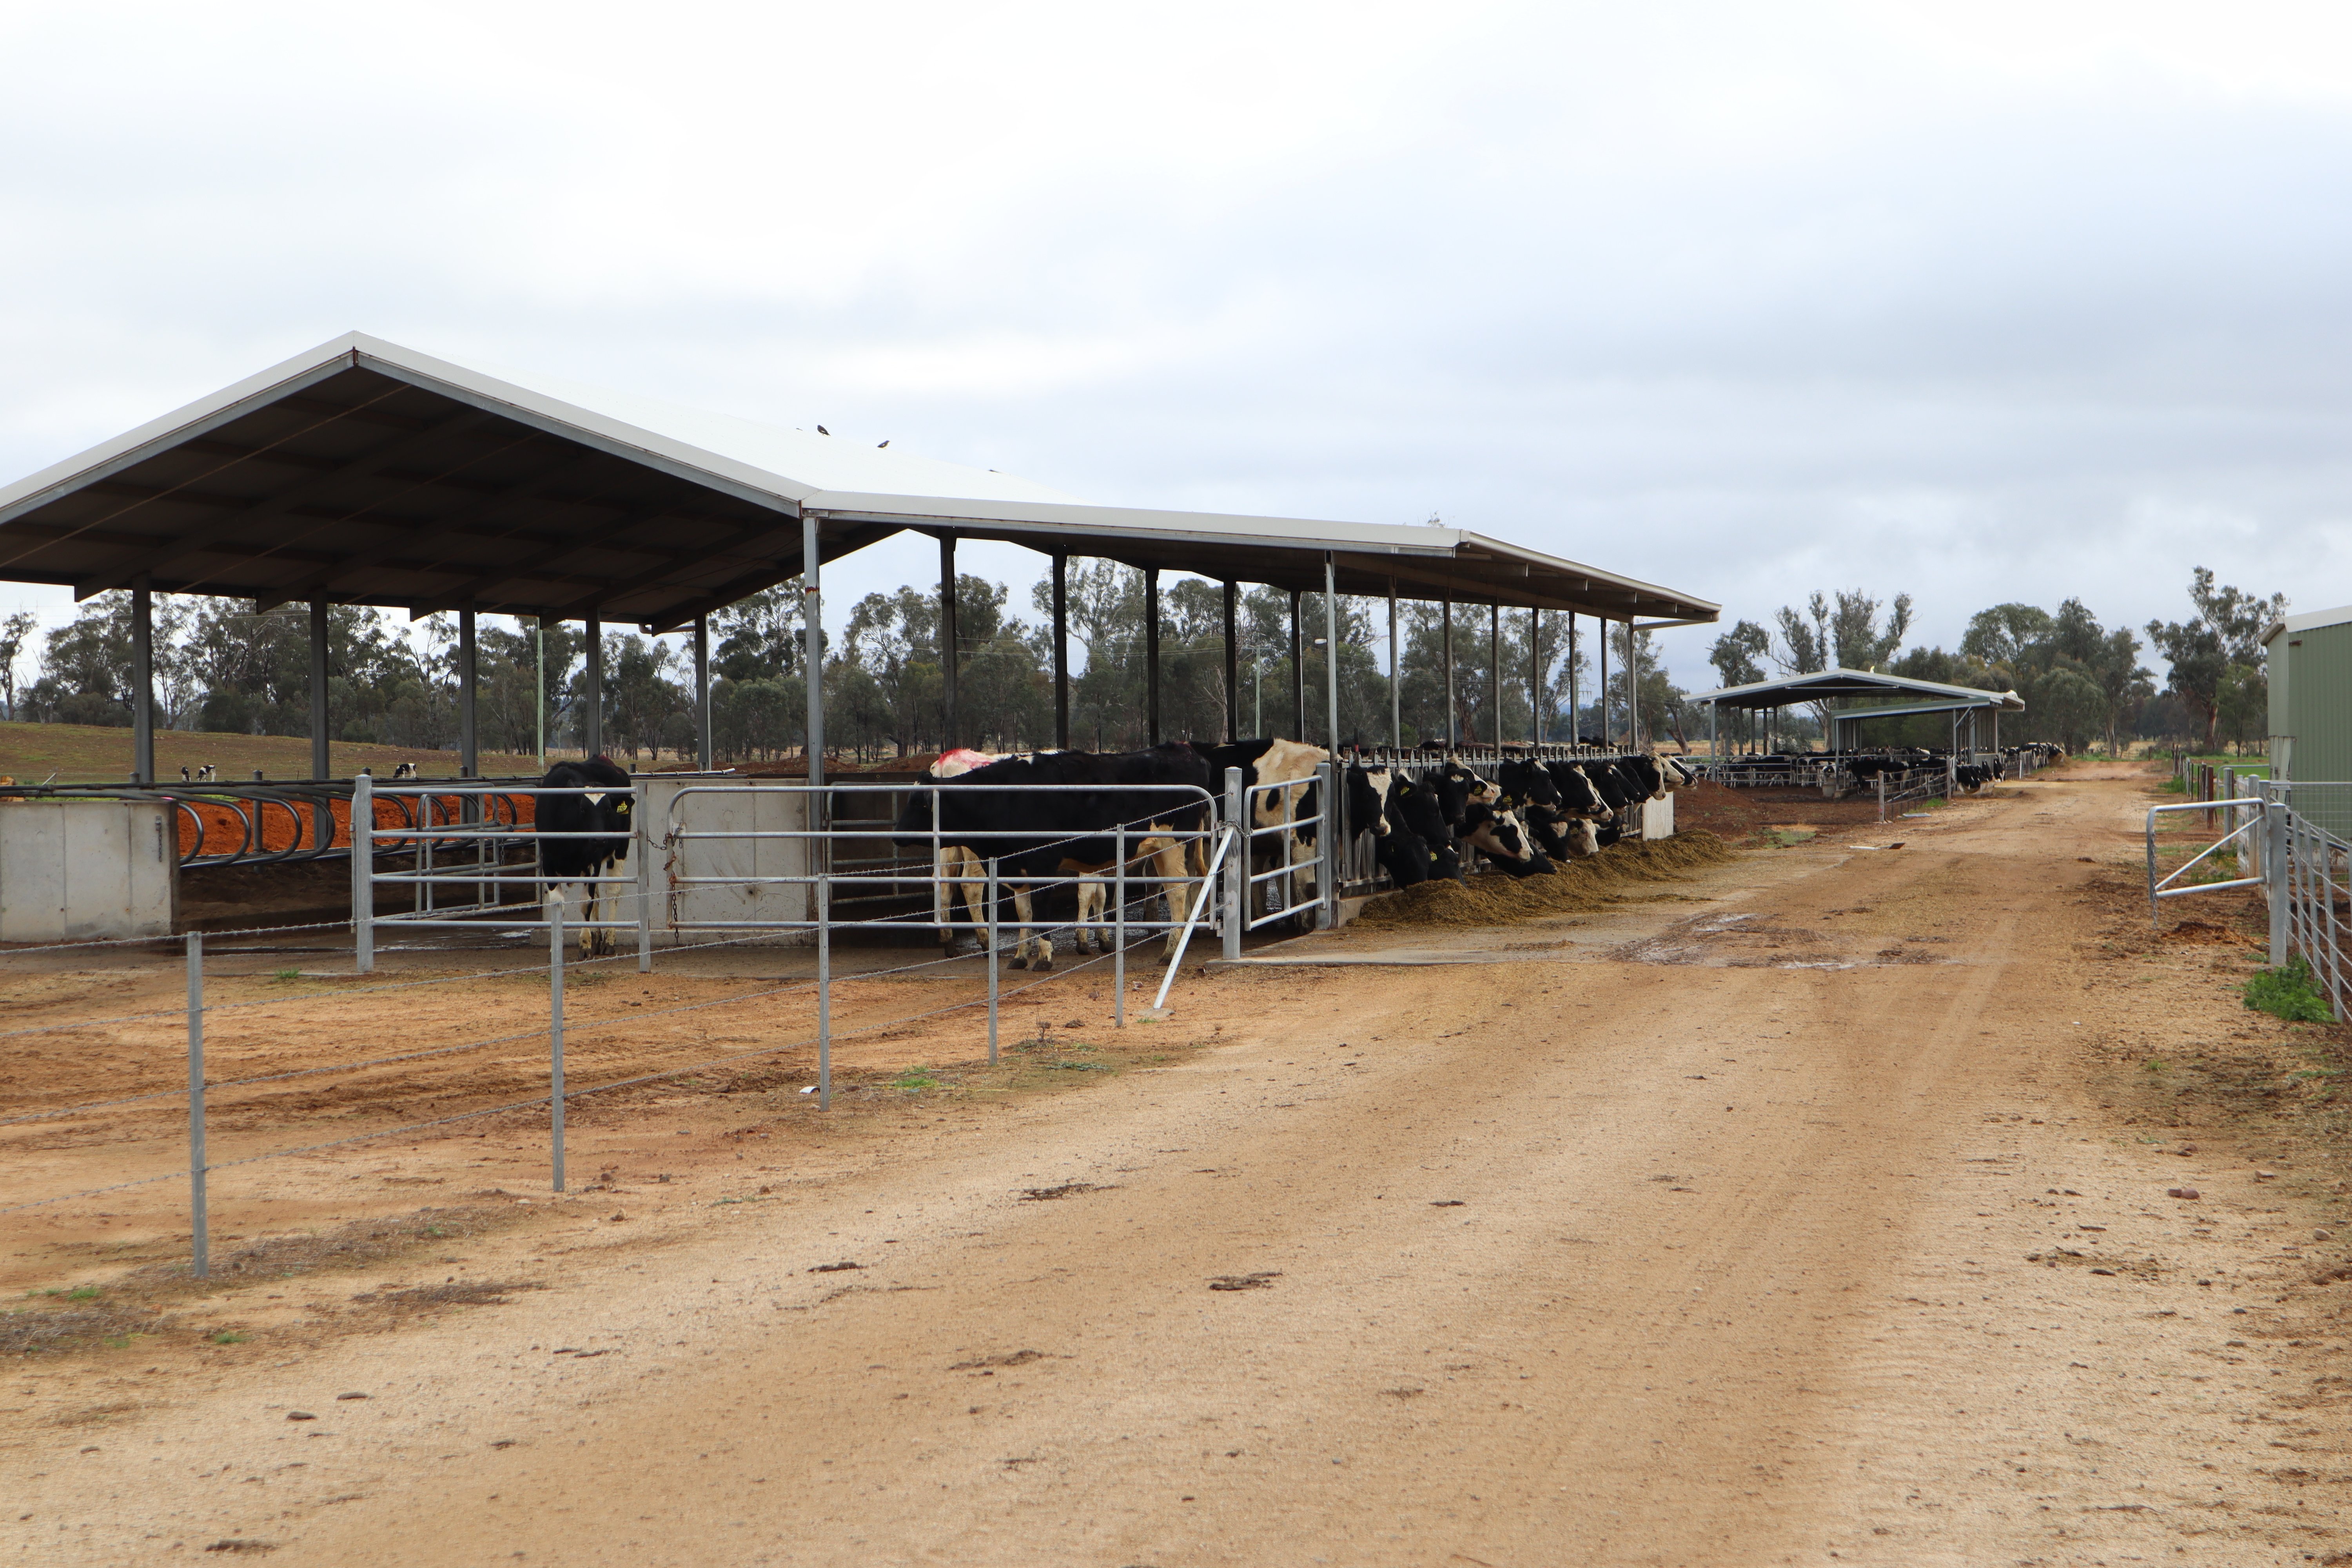 Cowra NSW feedlot shelter in use